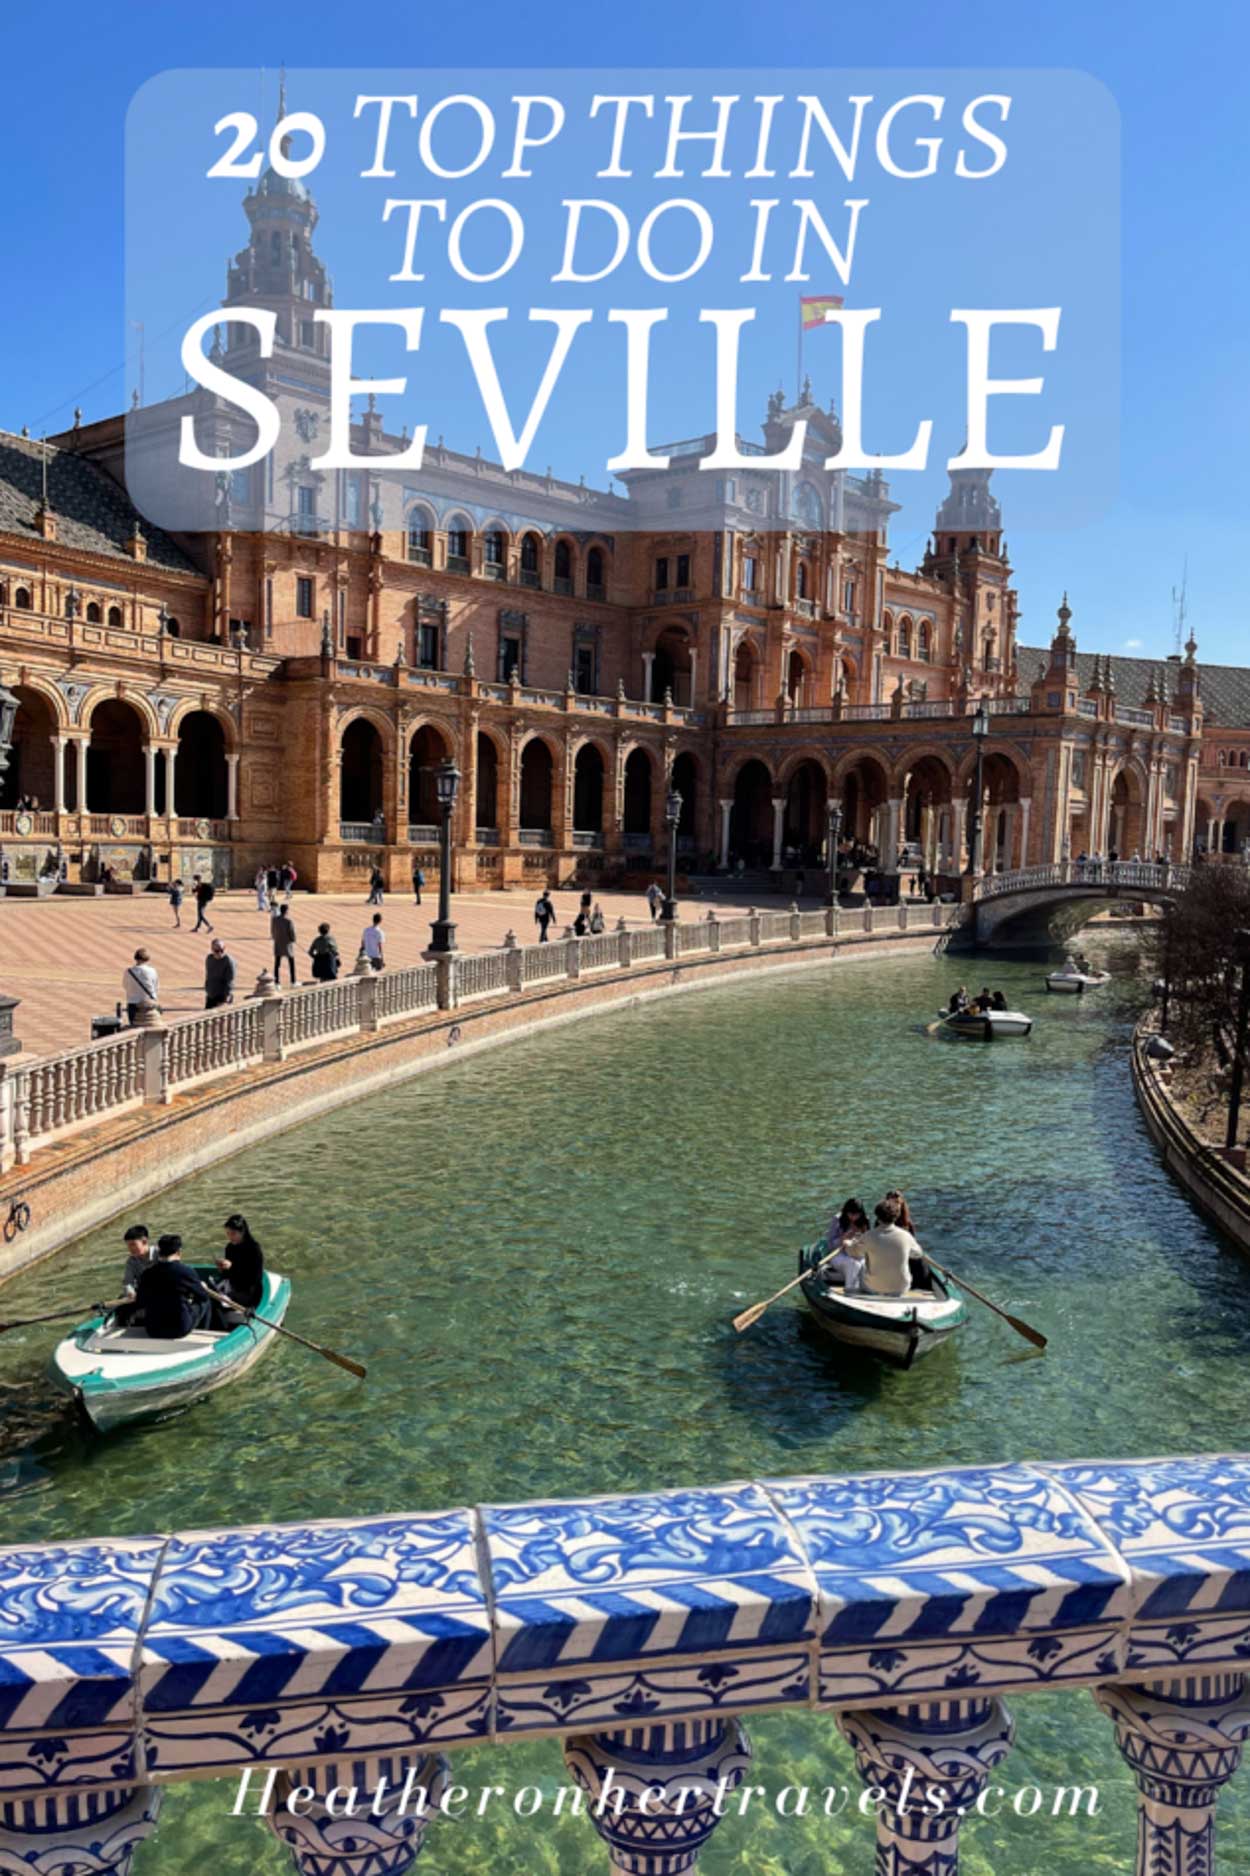 20 fun things to do in Seville Spain